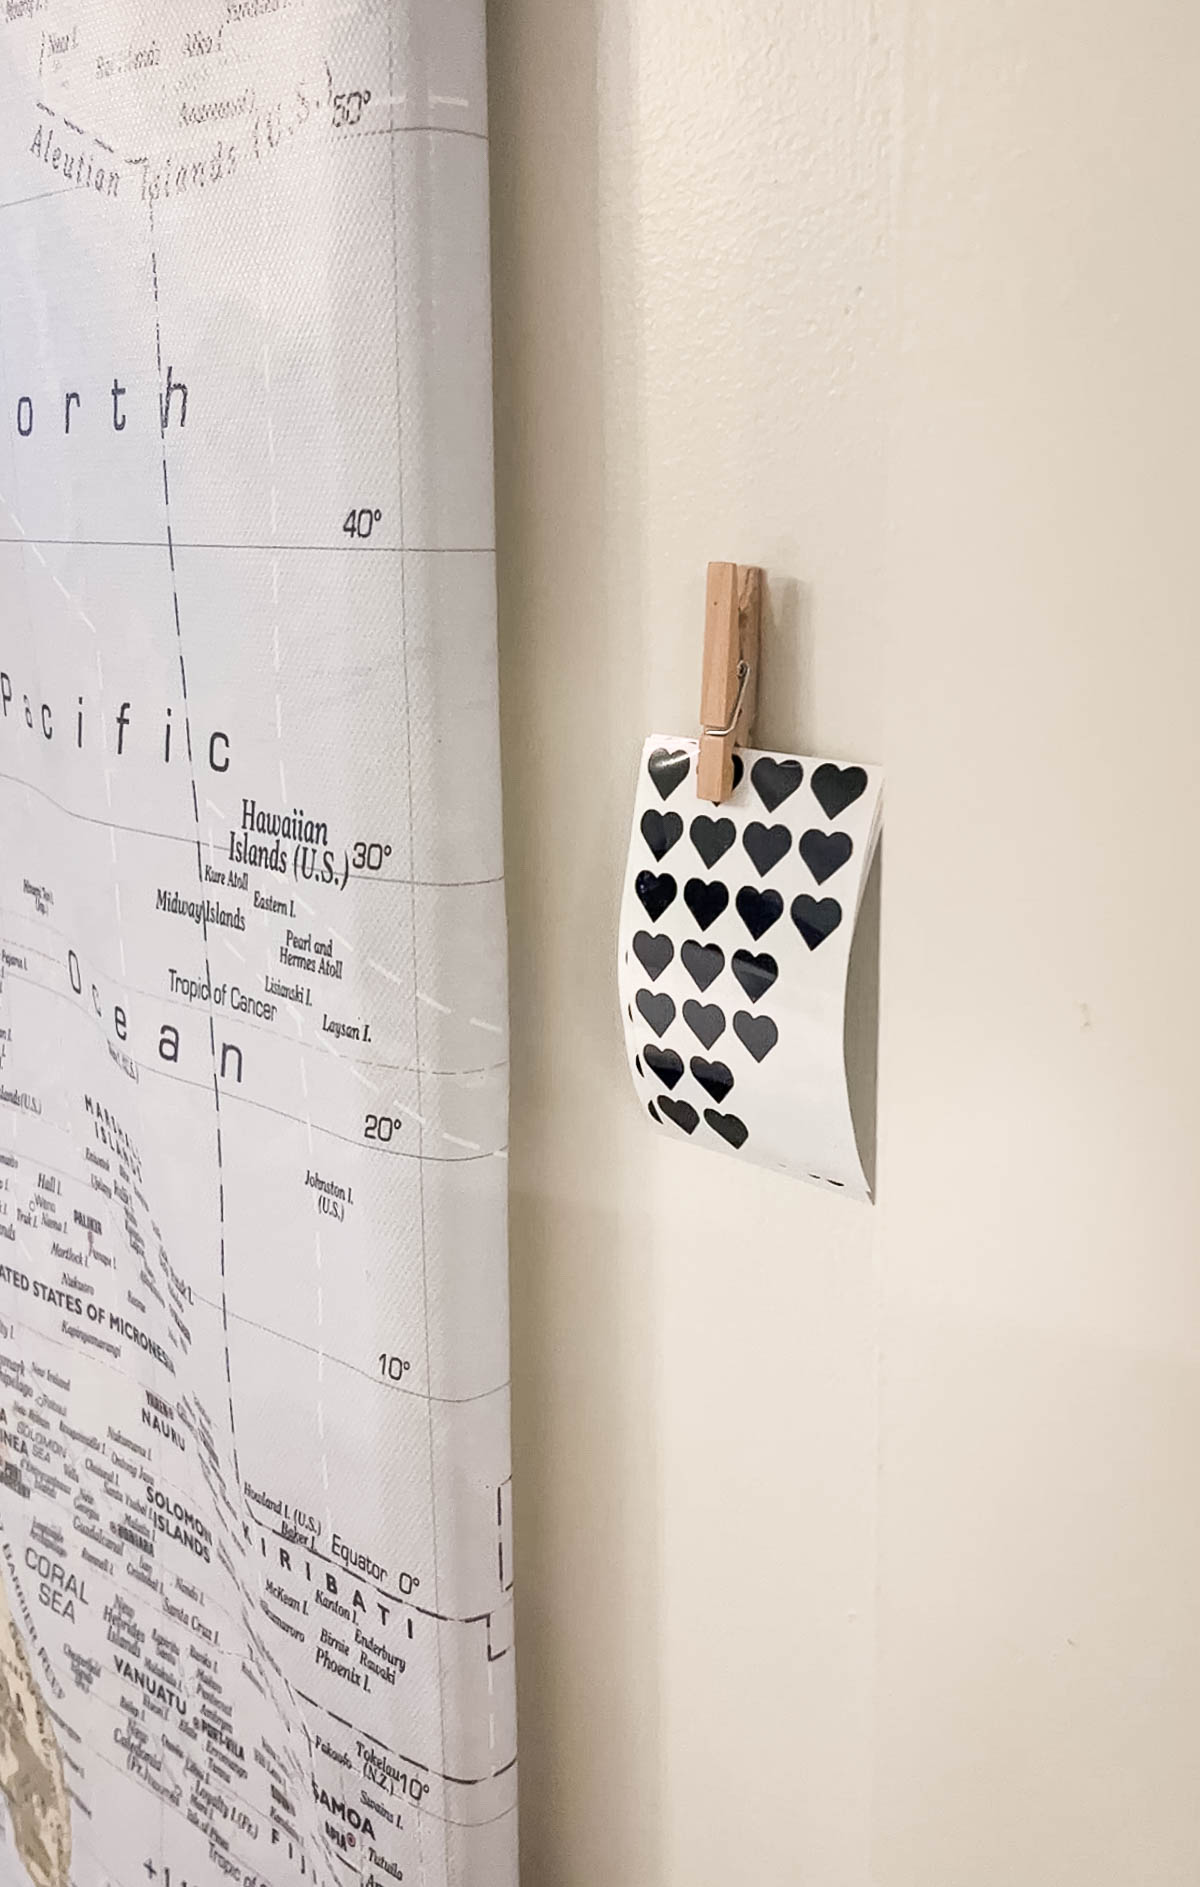 Map for airbnb guests to leave a sticker where they are from